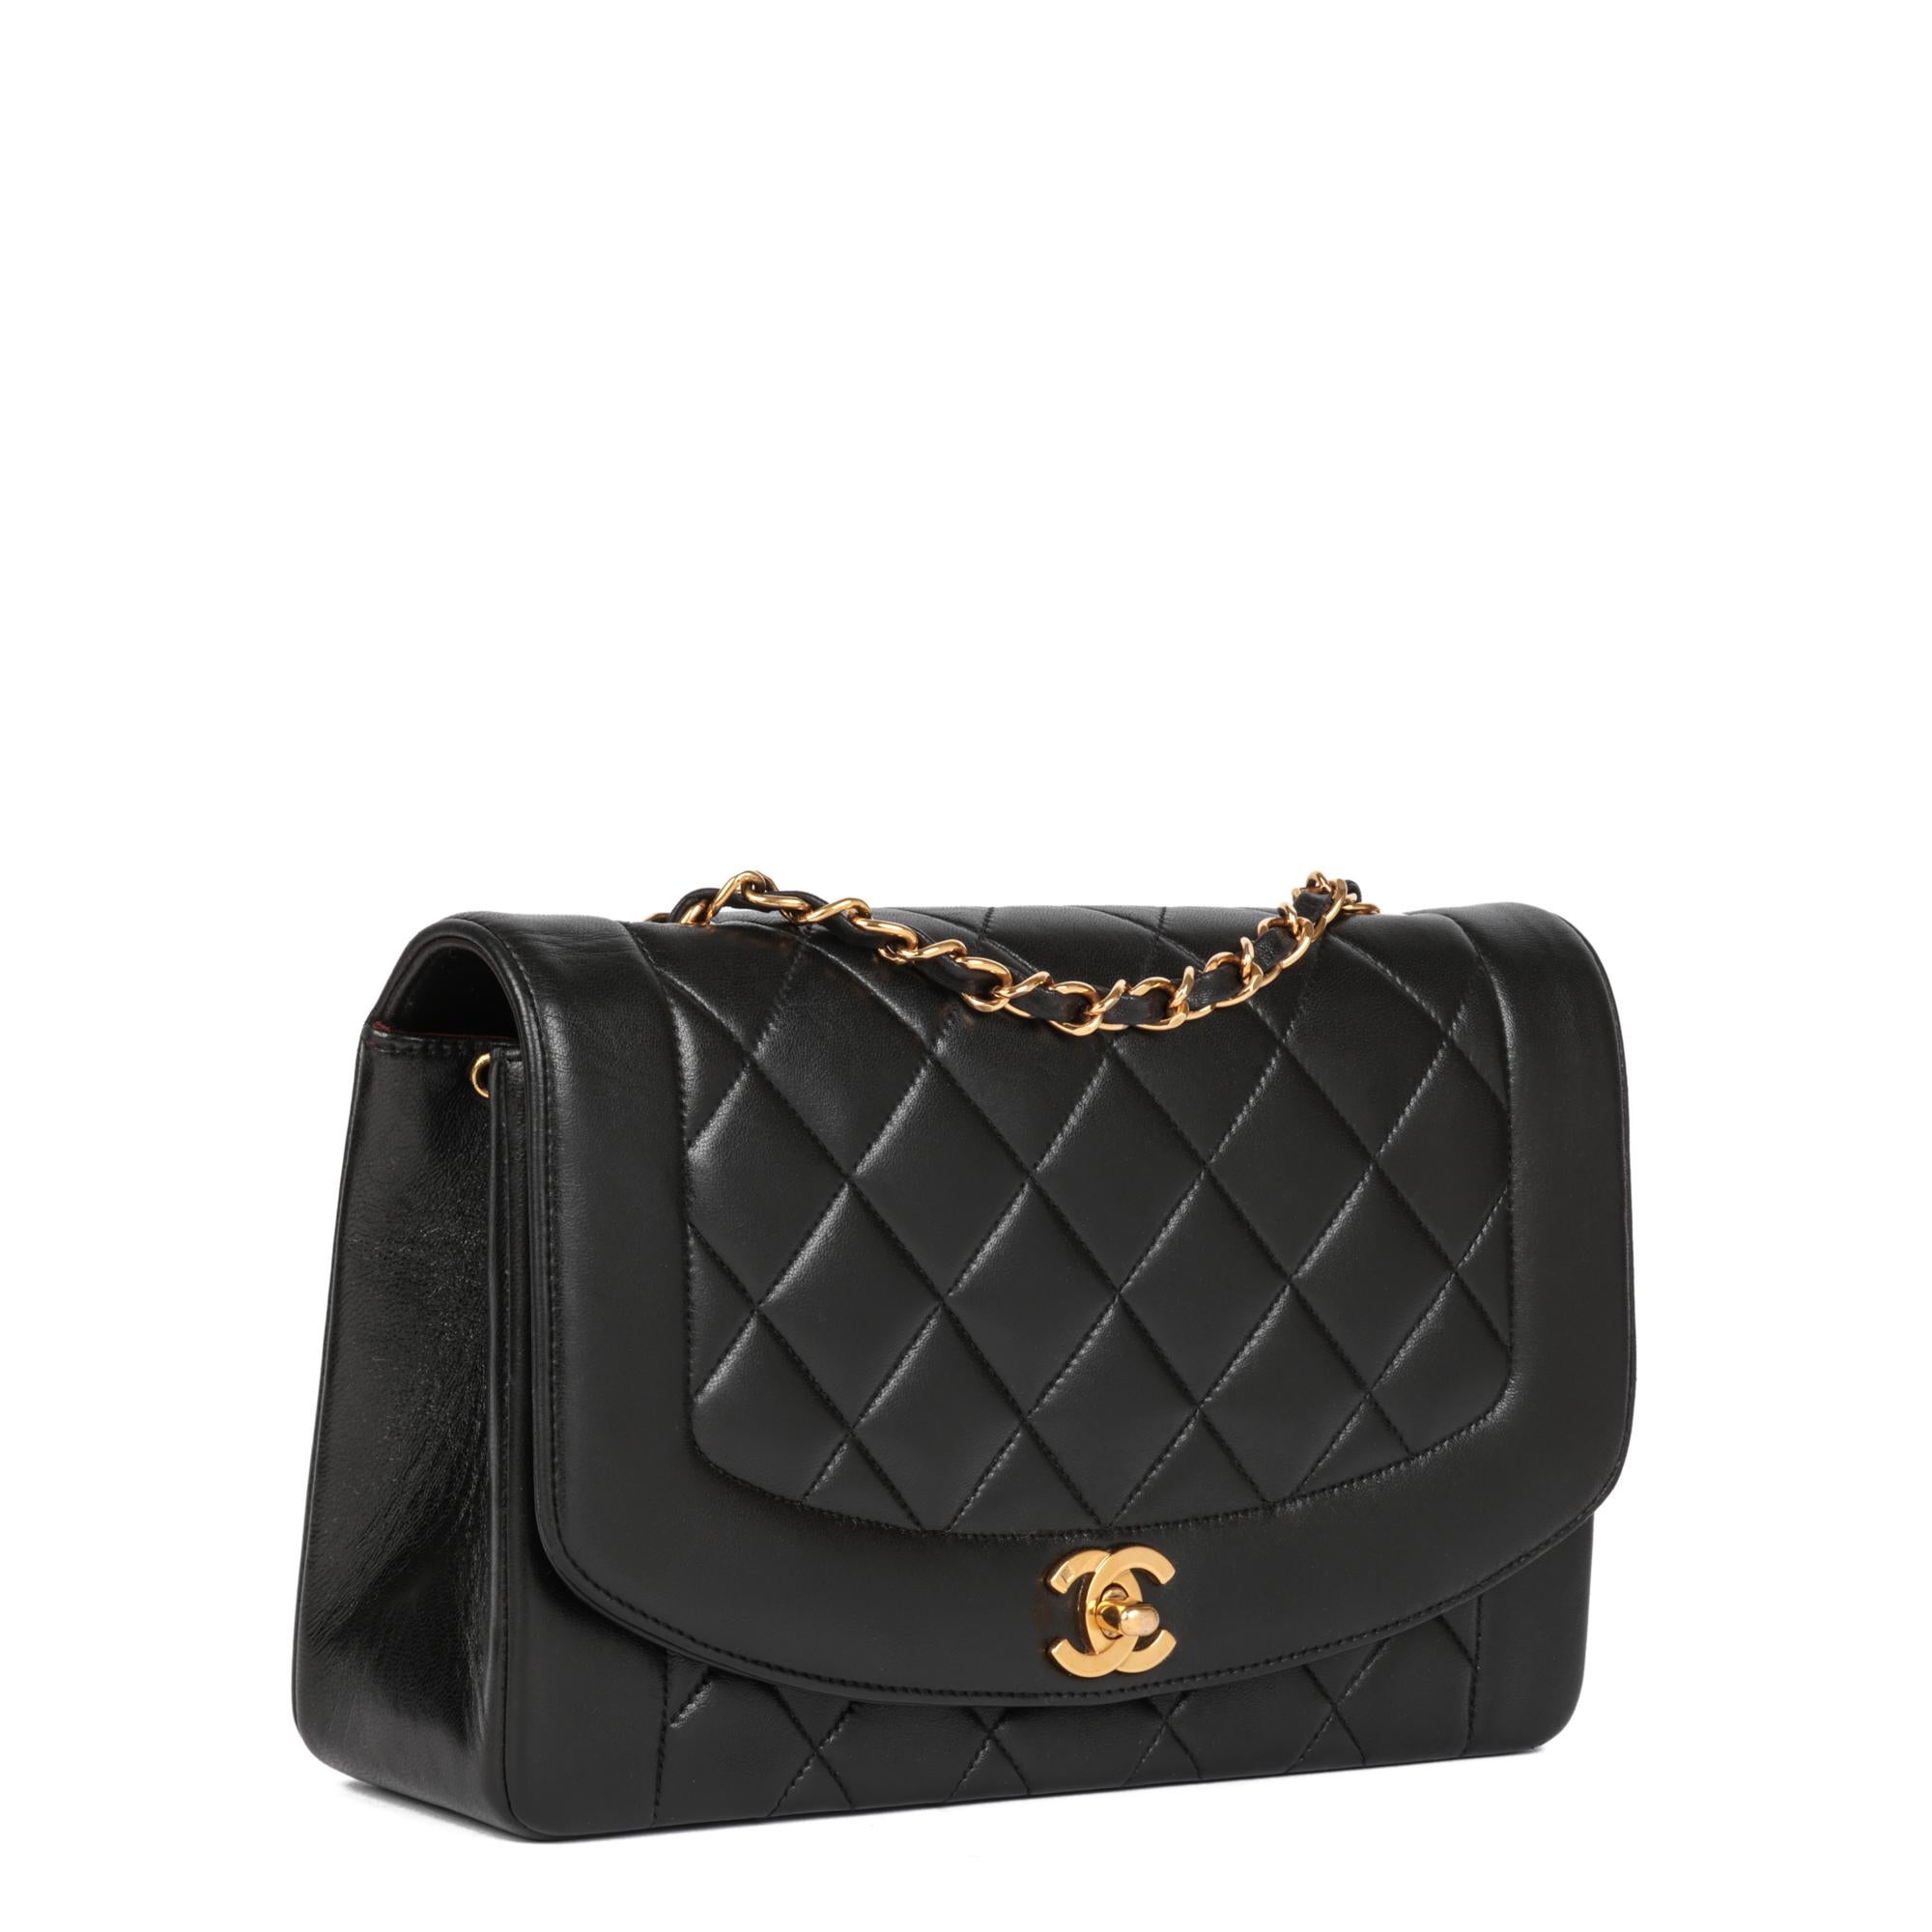 CHANEL
Black Quilted Lambskin Vintage Medium Diana Classic Single Flap Bag

Serial Number: 2910409
Age (Circa): 1993
Accompanied By: Chanel Dust Bag, Authenticity Card, Box, Protective Felt
Authenticity Details: Authenticity Card, Serial Sticker